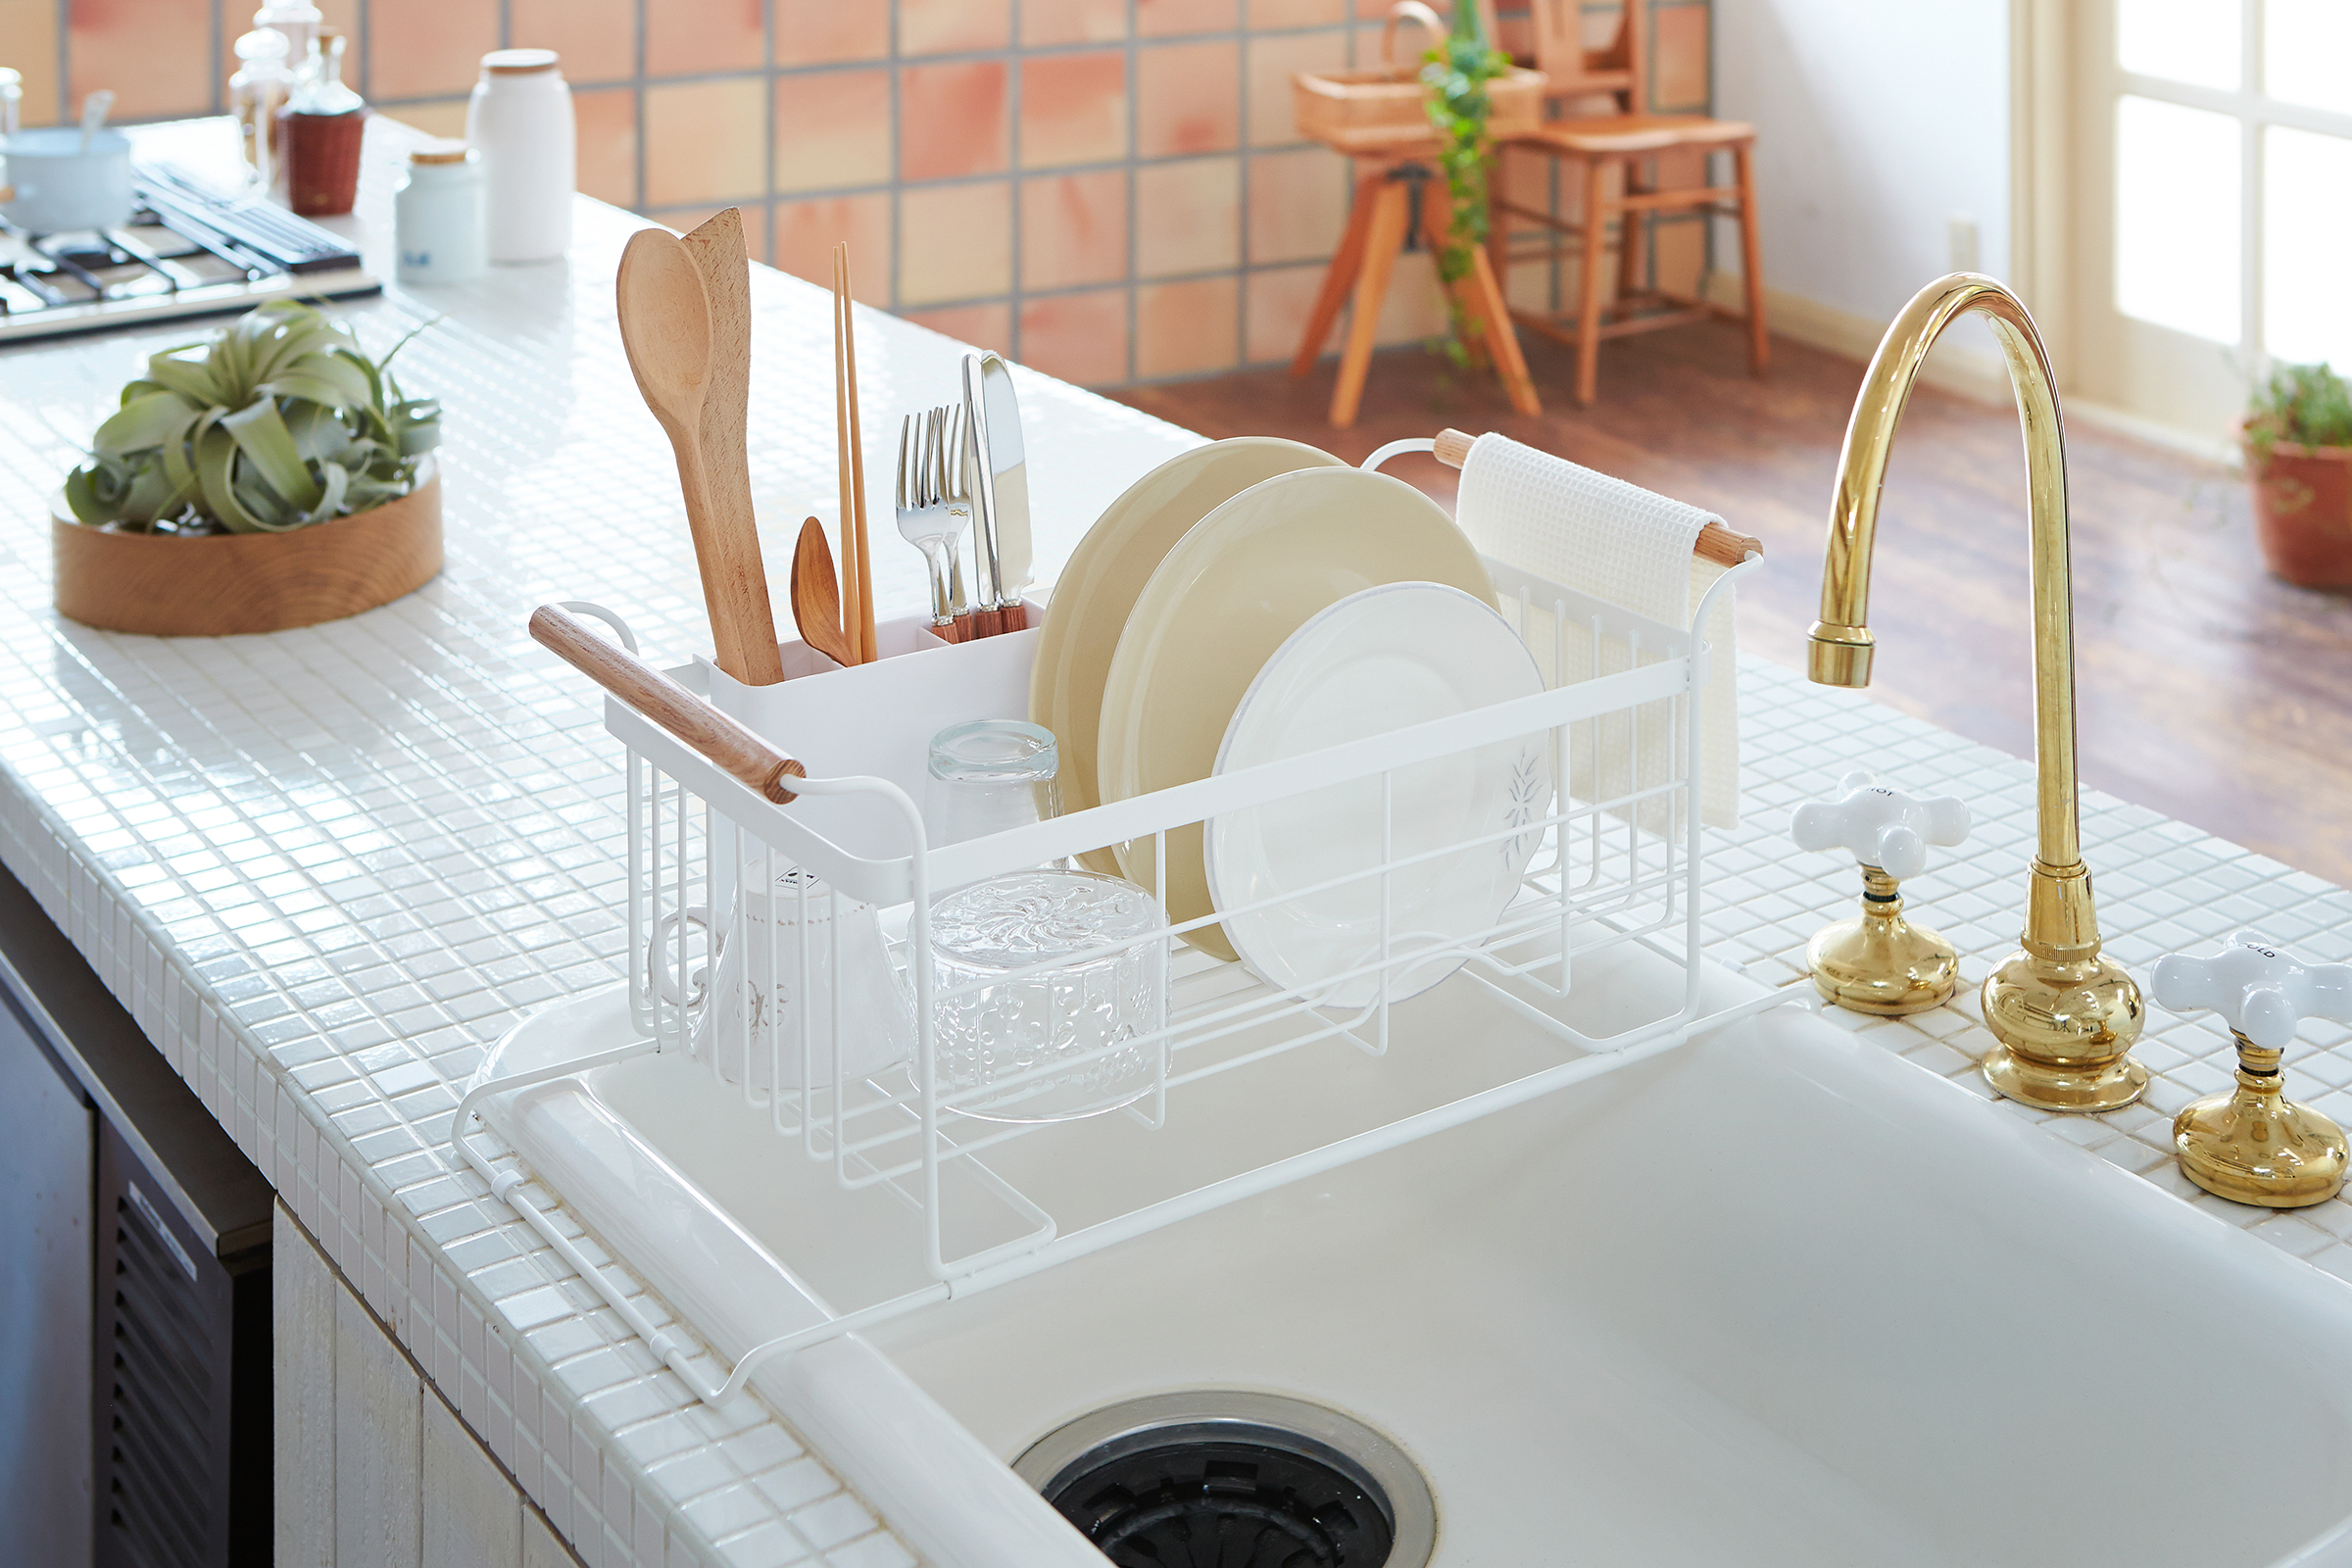 White Over-the-Sink Dish Rack holding plates, cups, bowls, and utensils on kitchen sink countertop by Yamazaki Home.